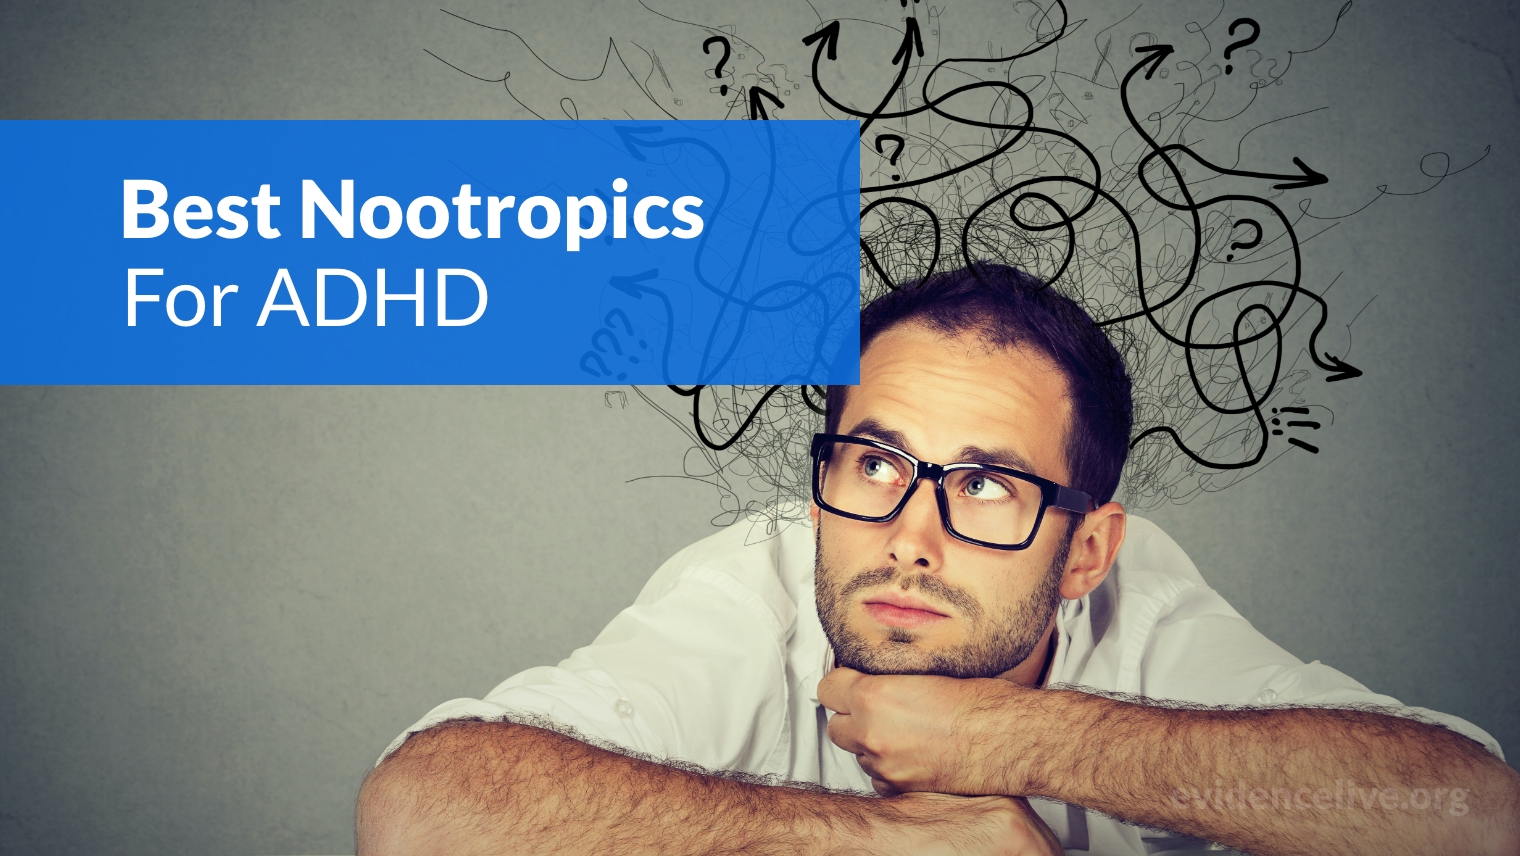 The Best Nootropics For ADHD